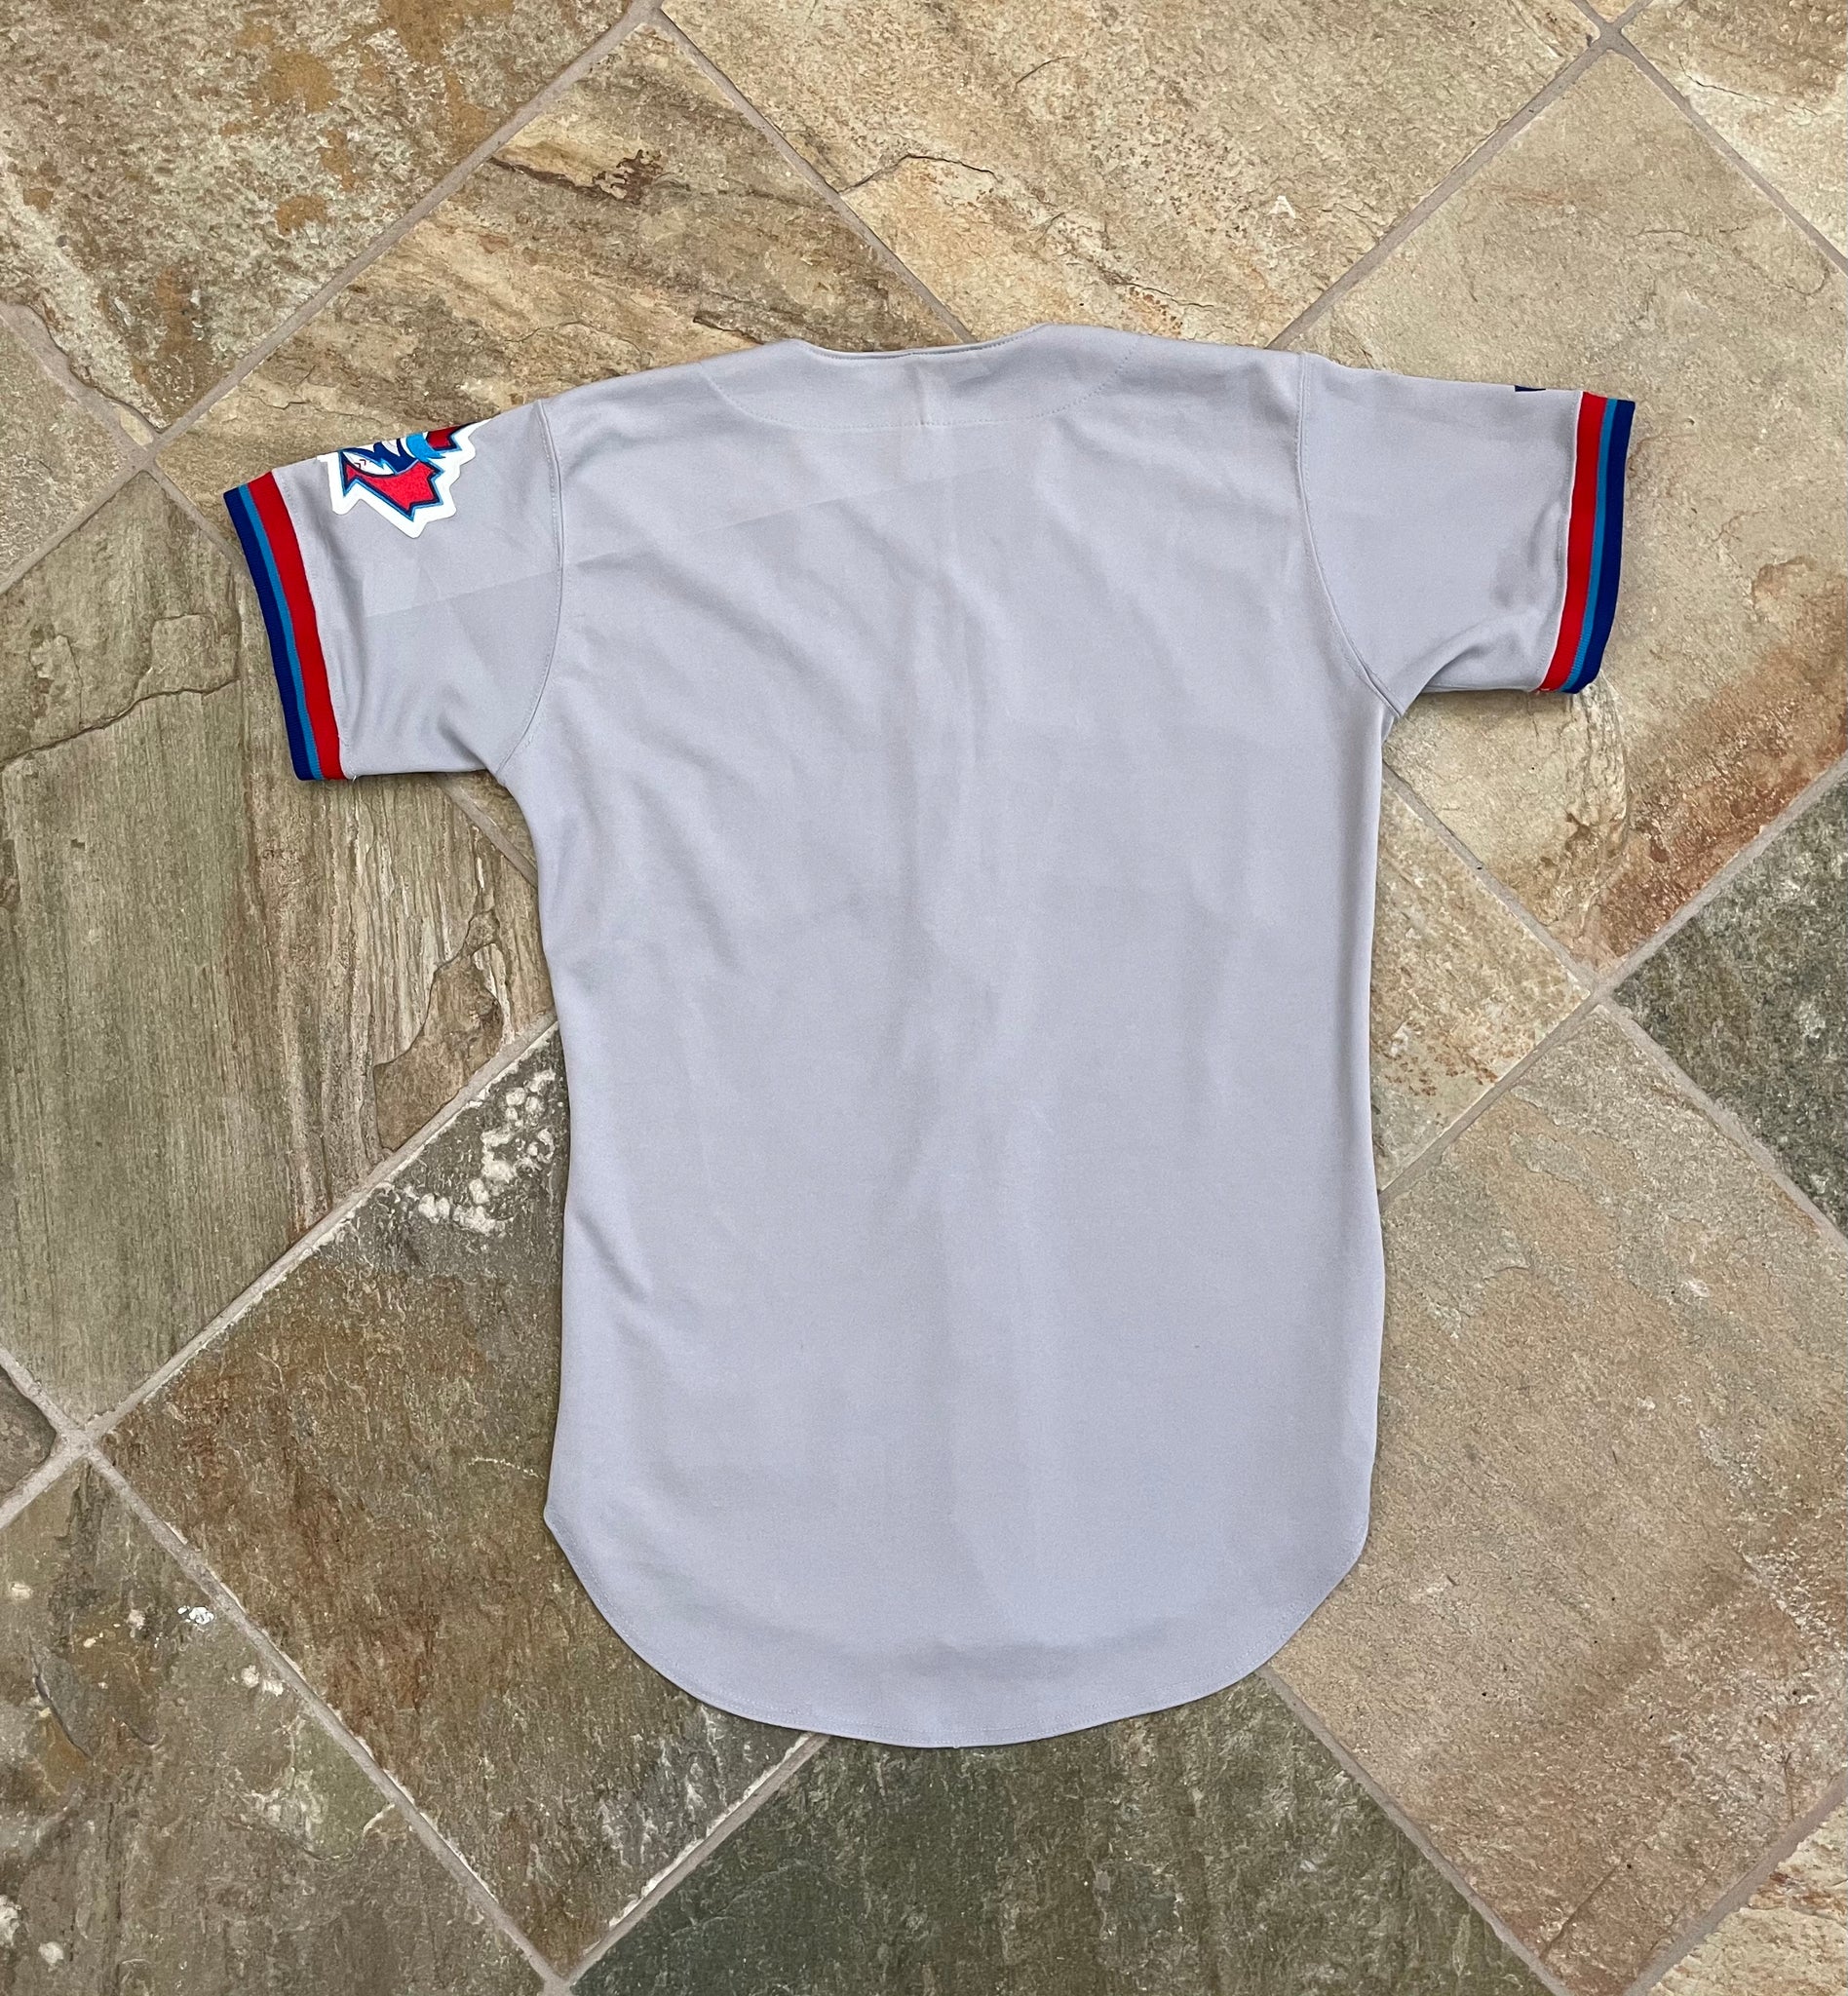 Russell Diamond Collection: Away, Montreal Expos Jersey- Size 40